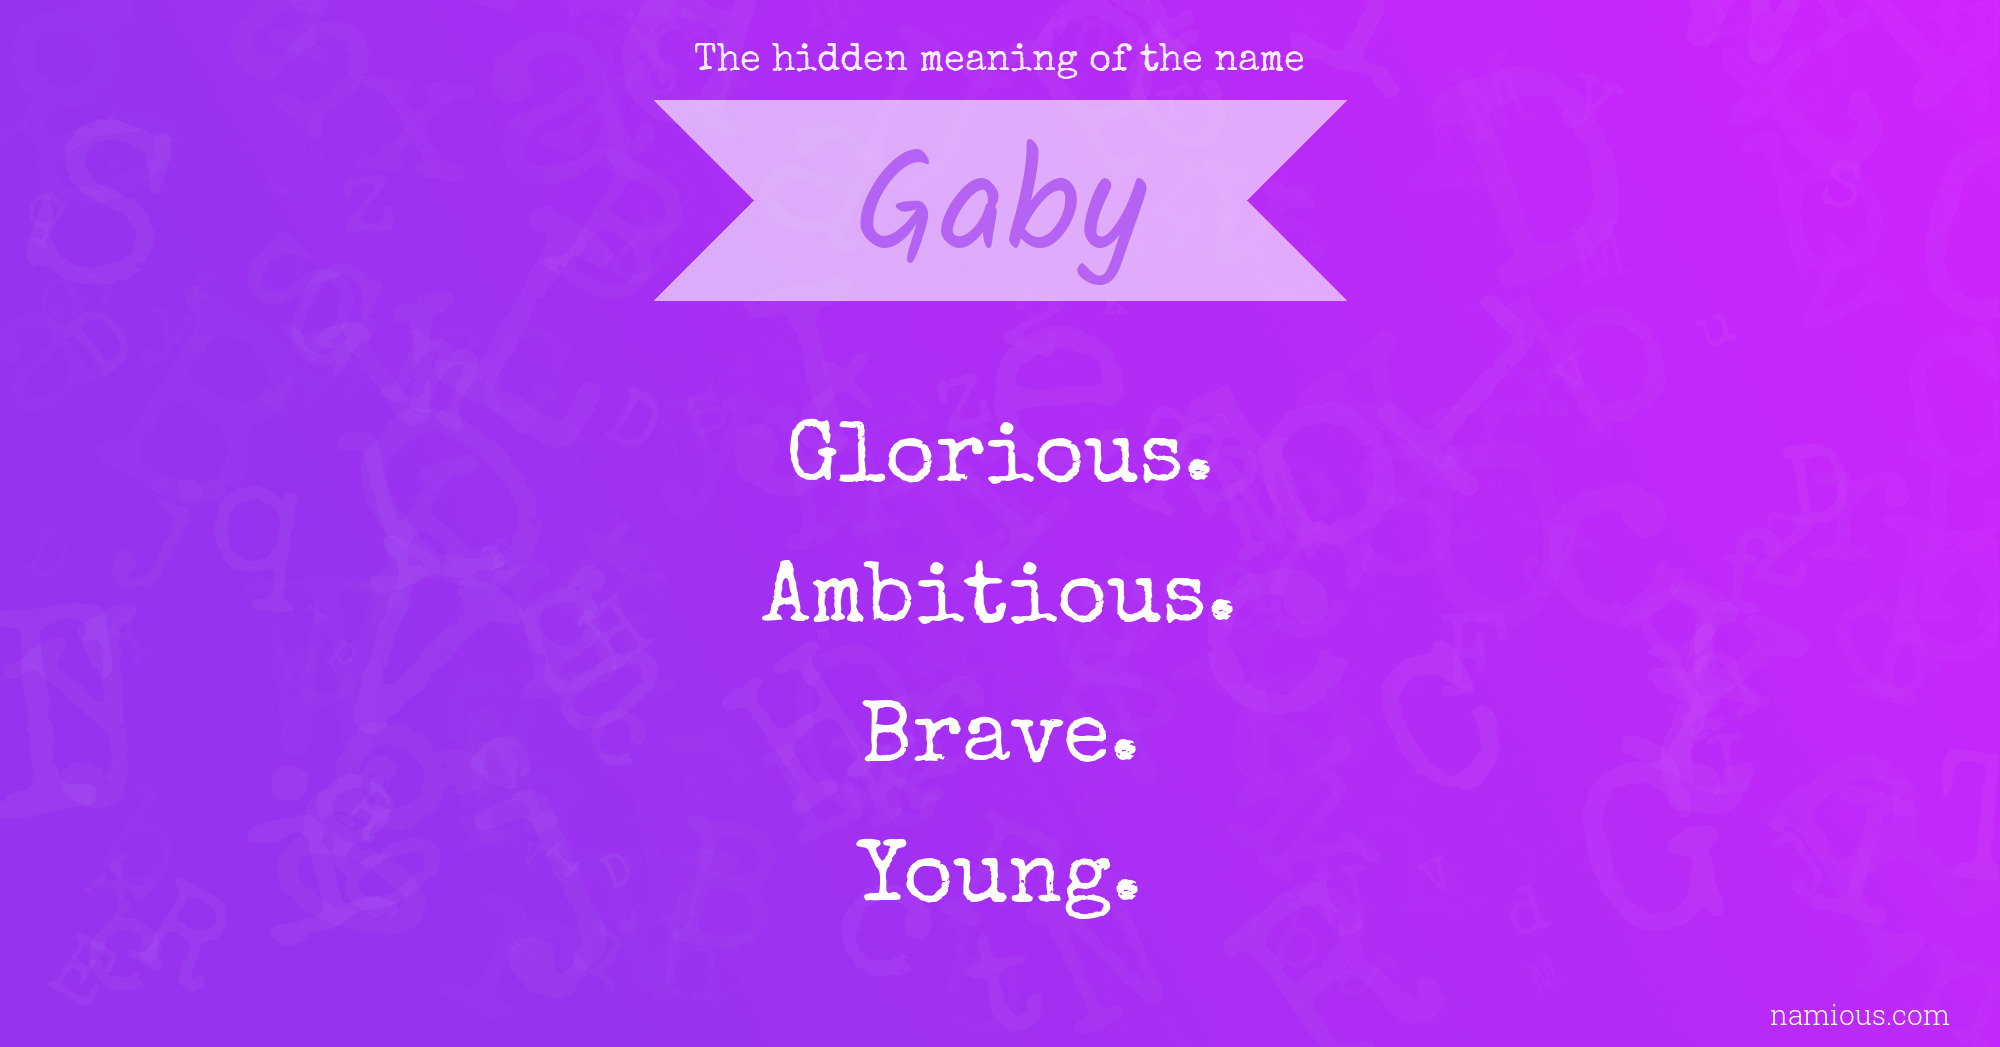 The hidden meaning of the name Gaby